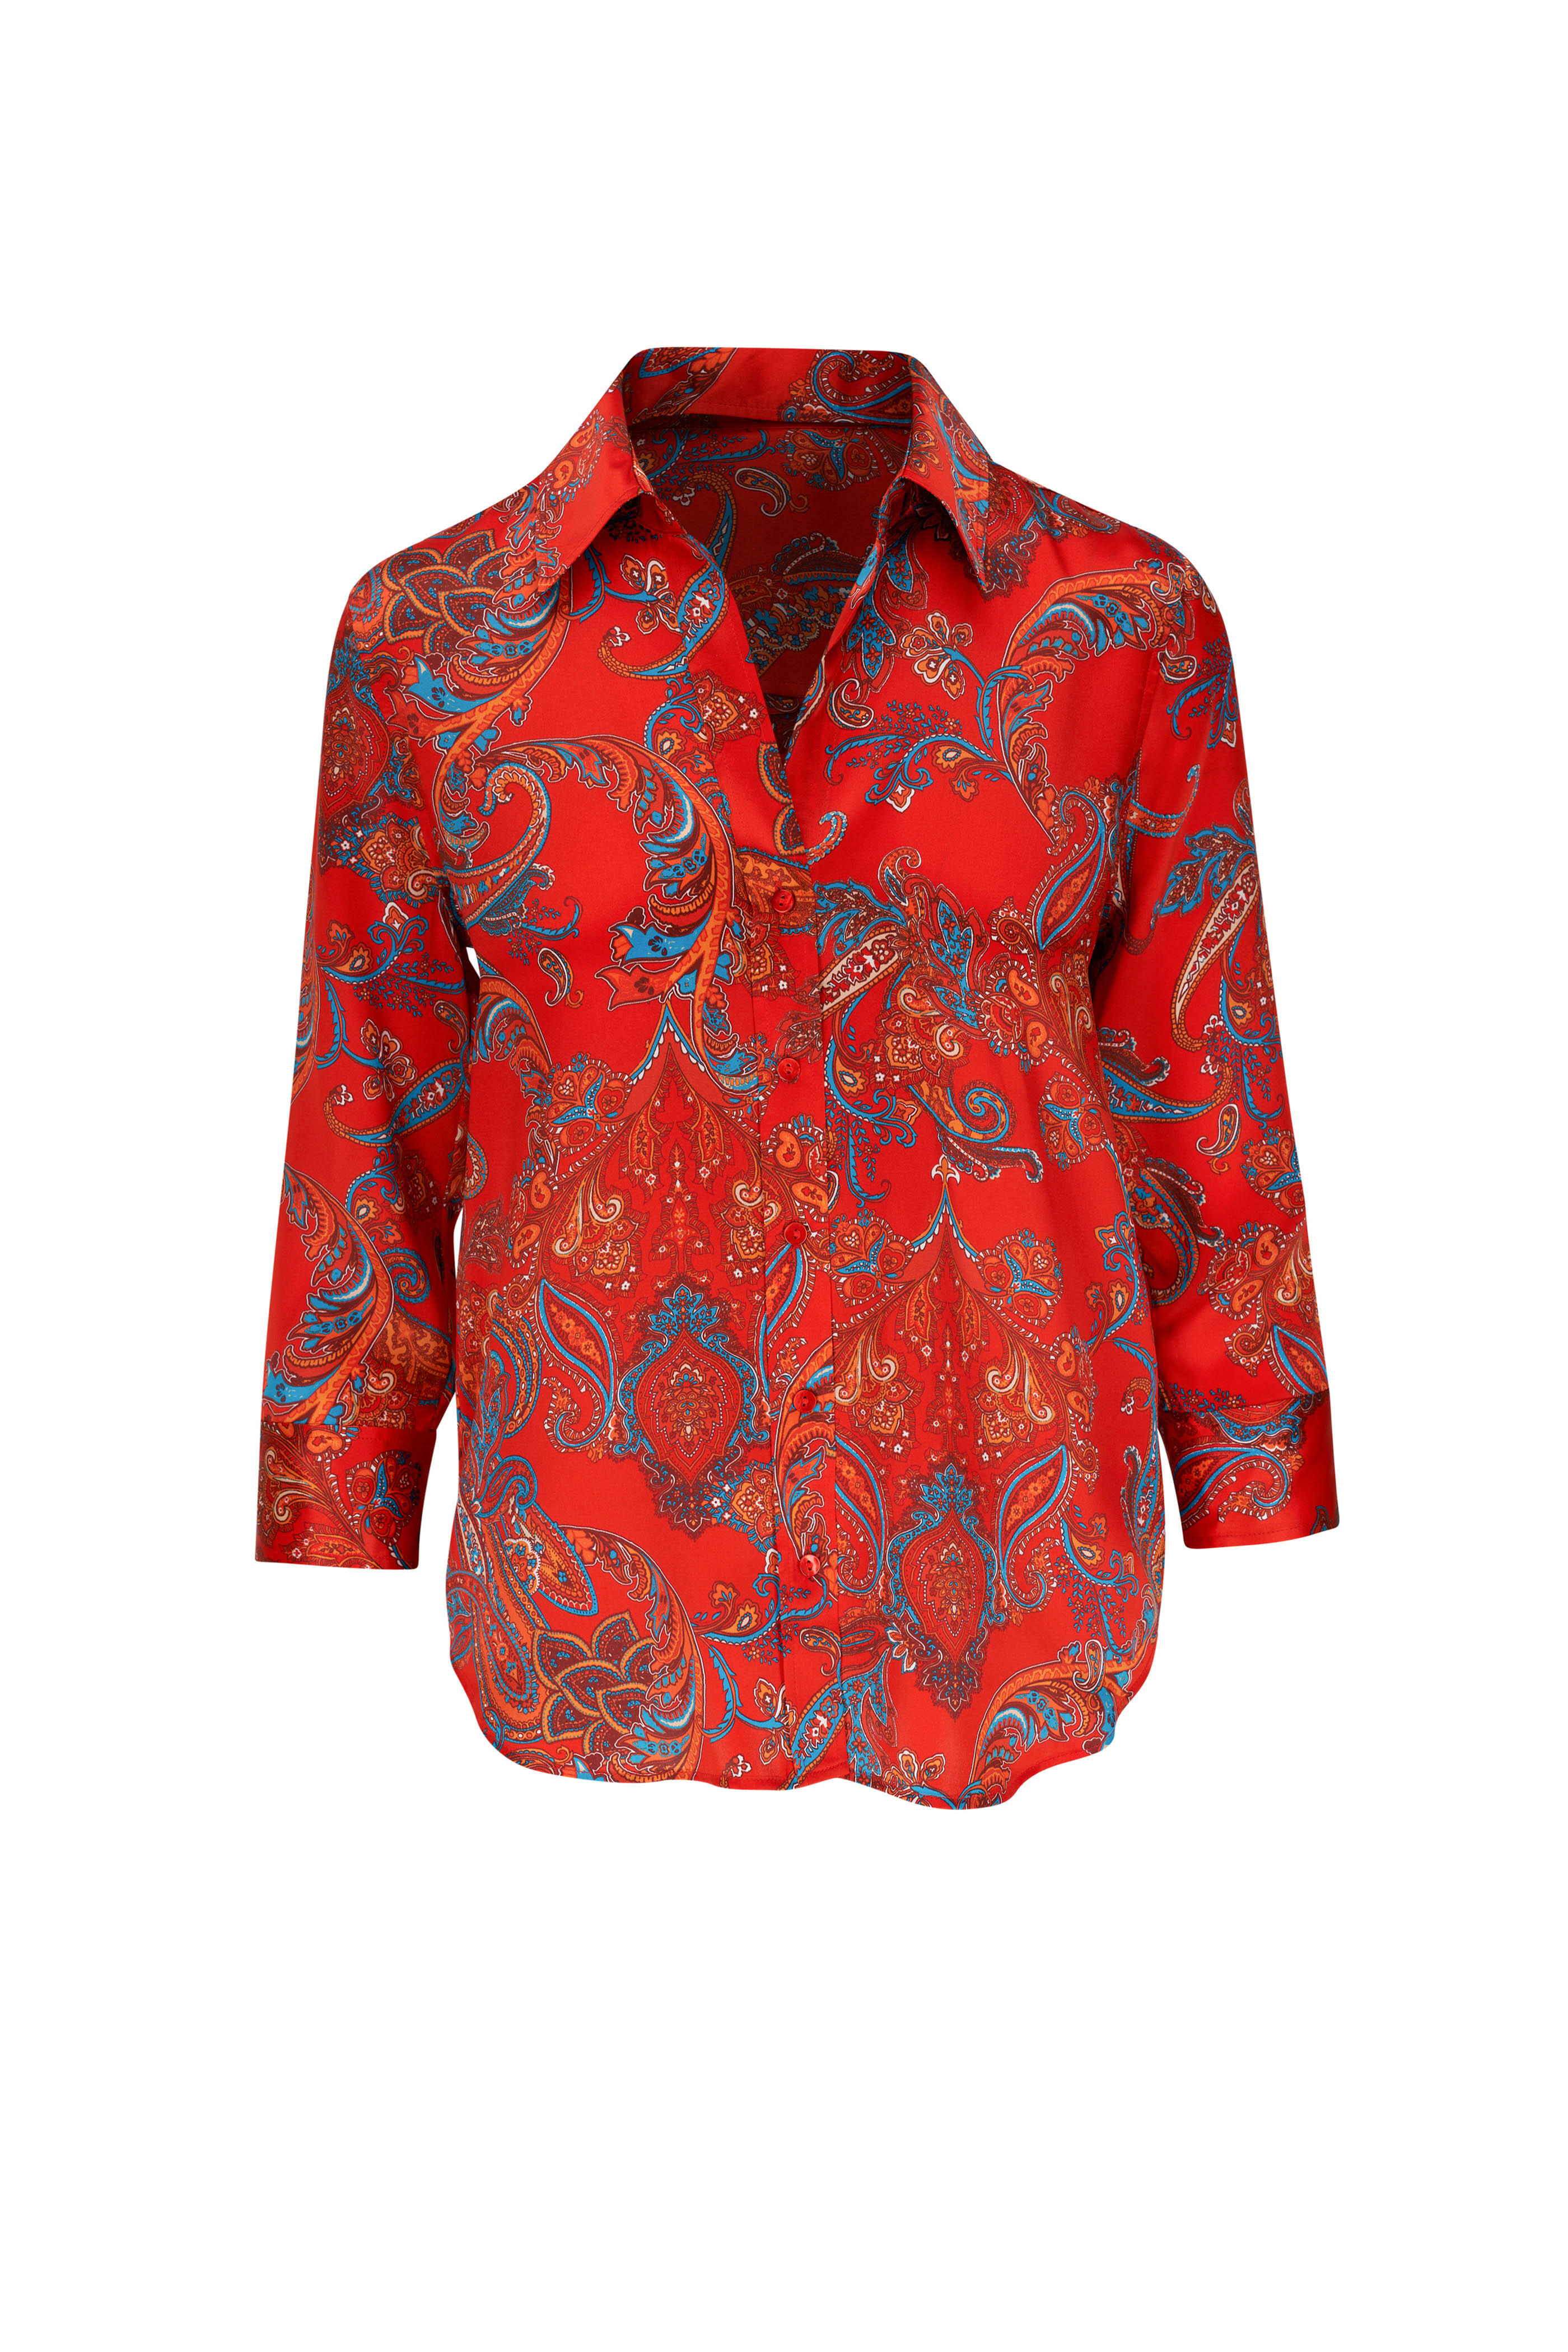 L'Agence - Dani Red Multi Printed Silk Blouse | Mitchell Stores